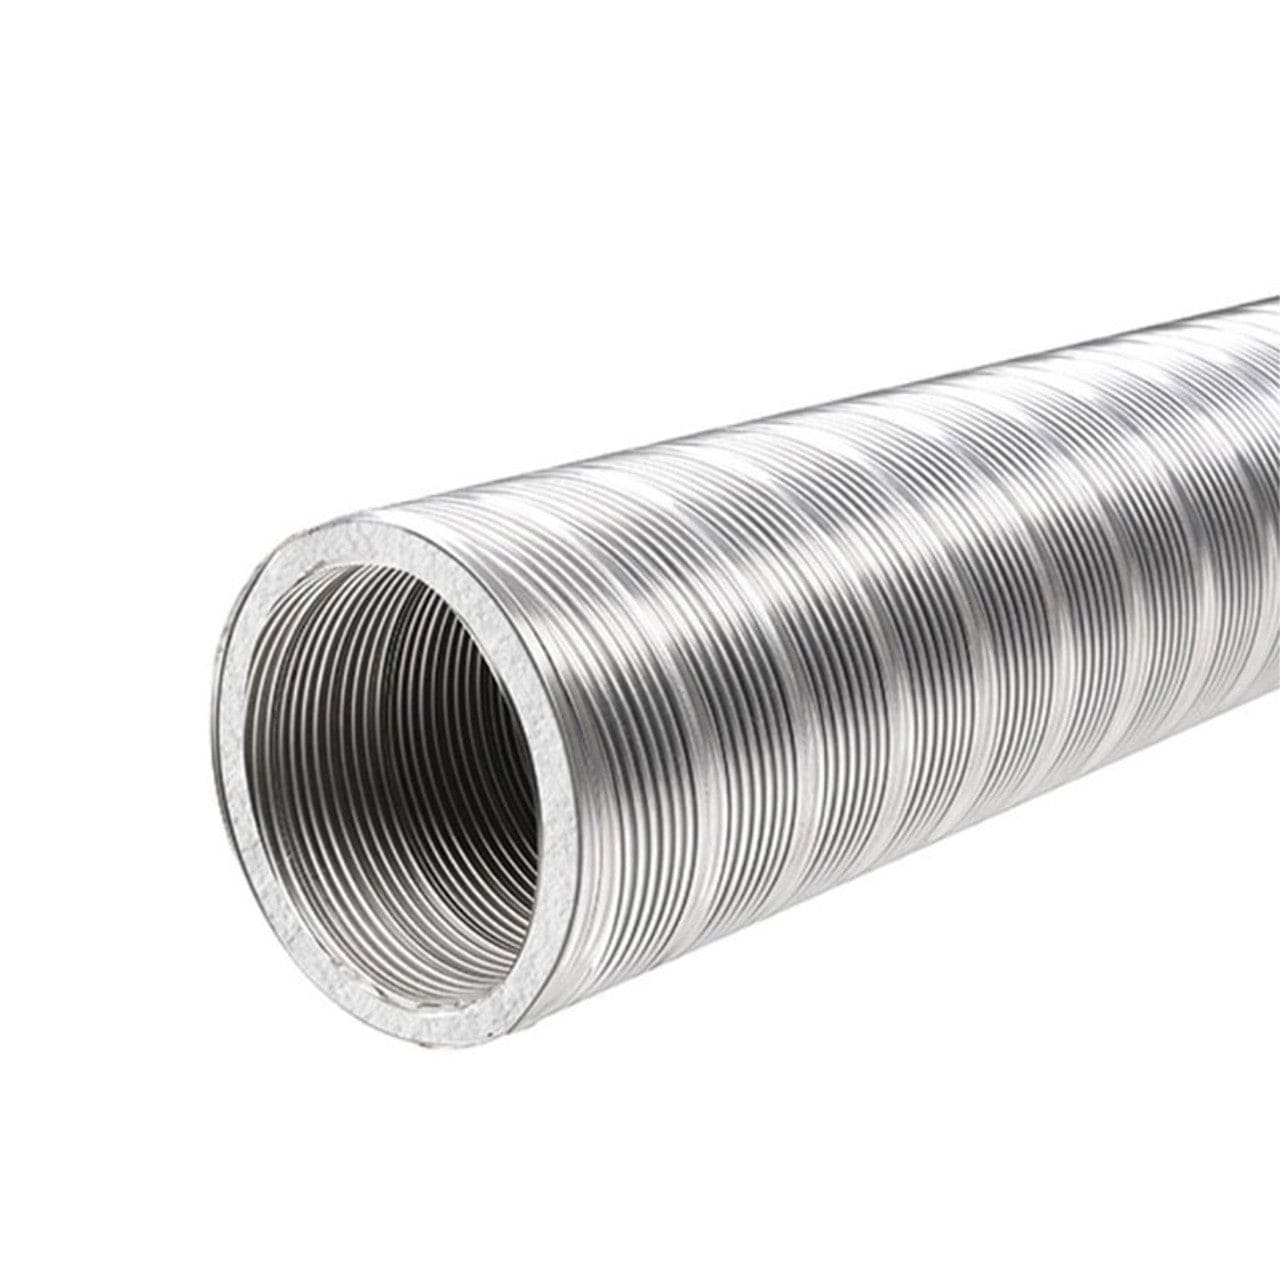 (DS) - 6" Premium Pre-Insulated Forever Flex 316Ti-Alloy .005 Stainless Cut-to-Length Liner - L5S6PI - Chimney Cricket